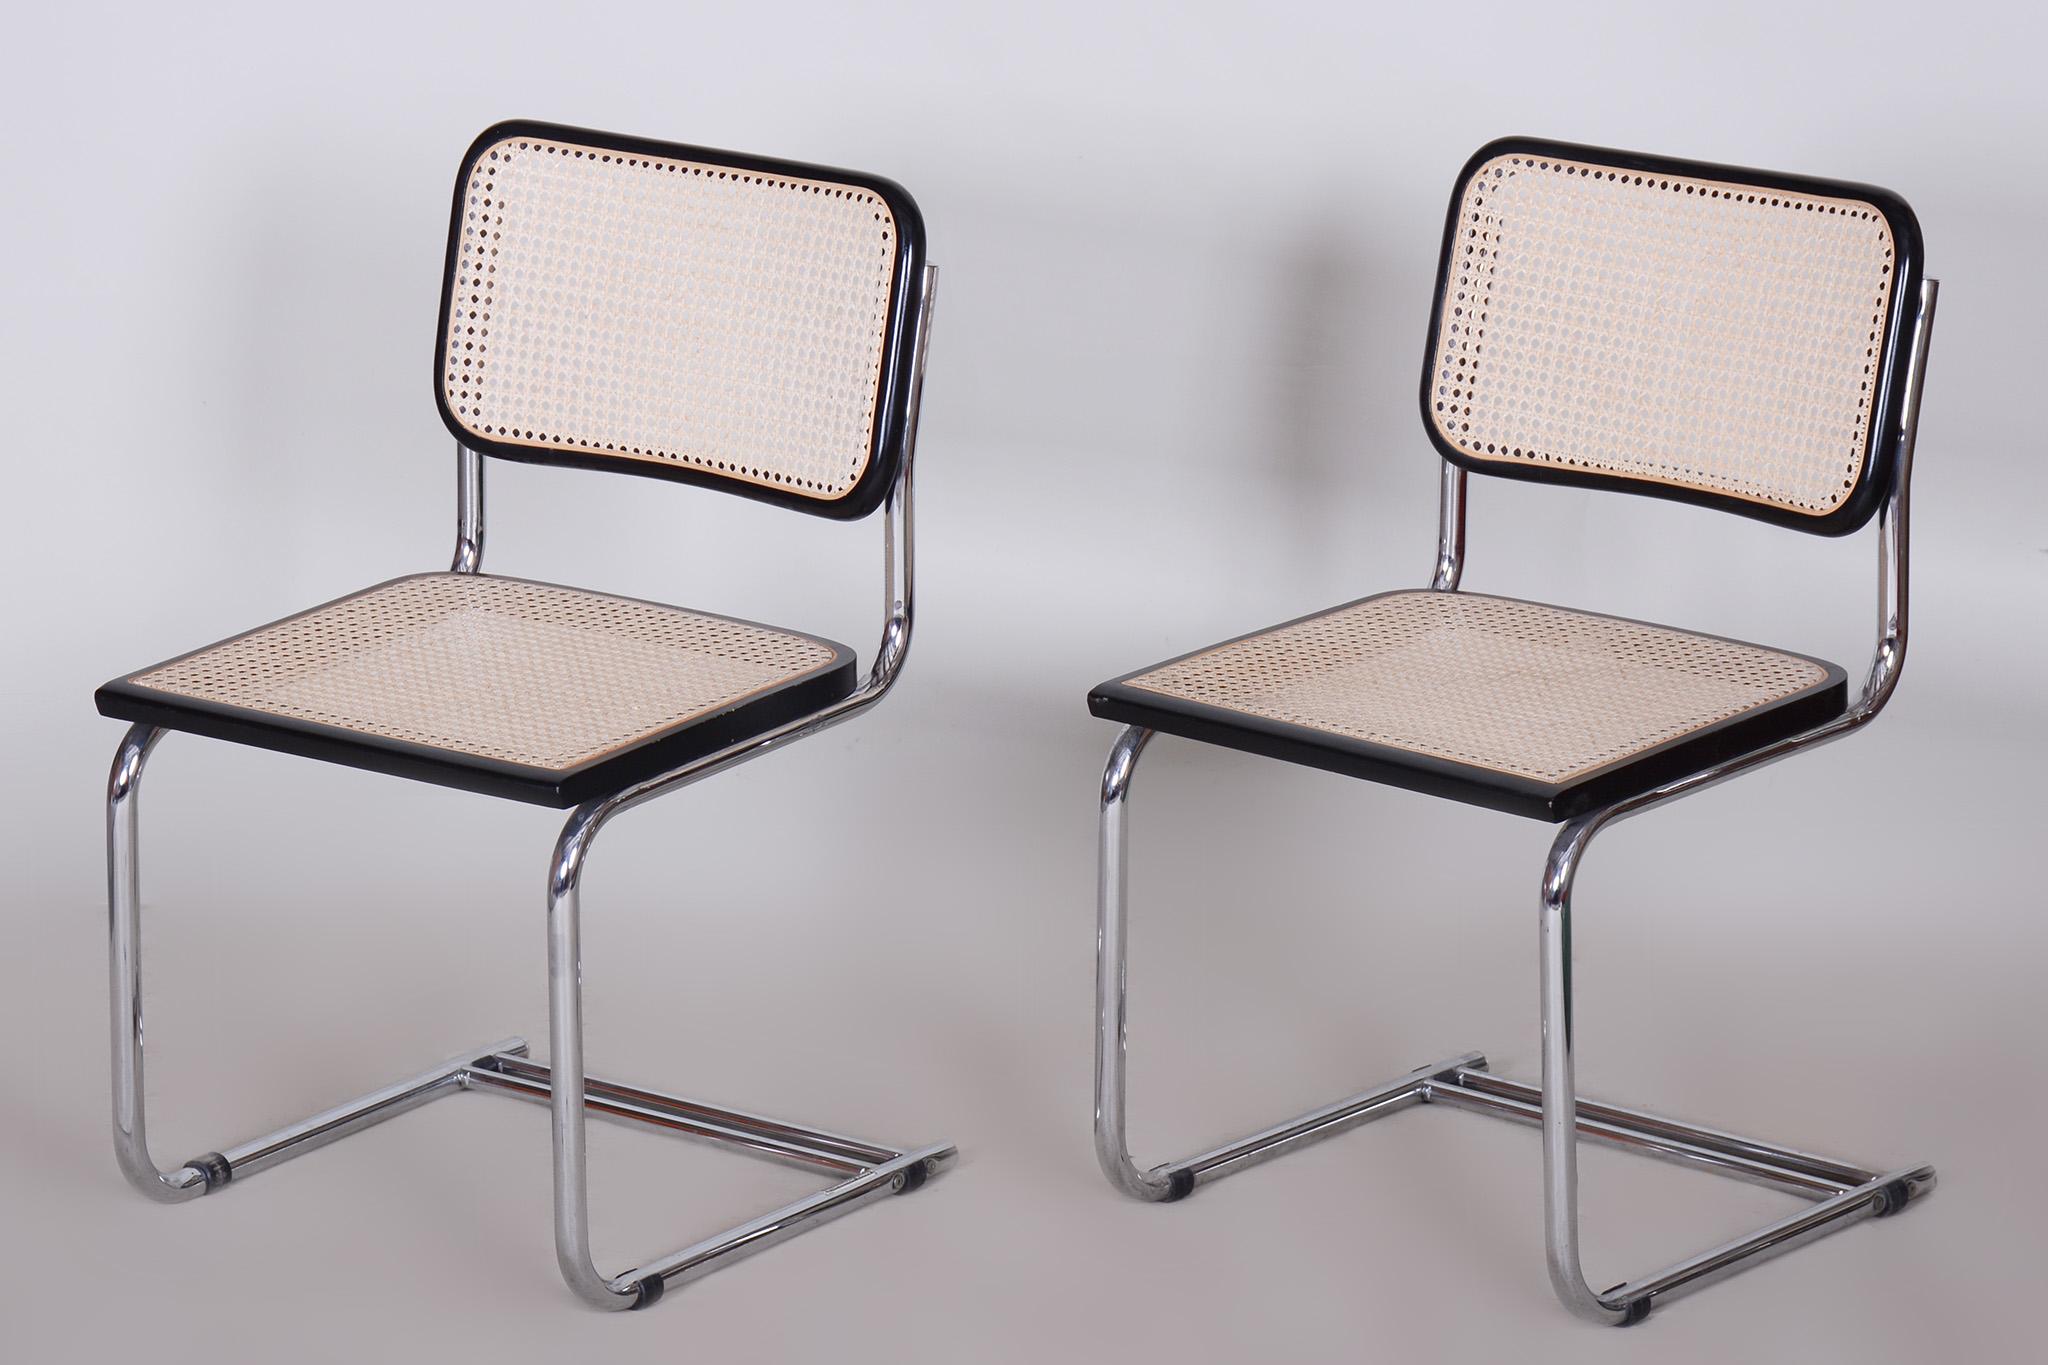 Mid-20th Century Original Pair of Bauhaus Chairs, Chrome-Plated Steel, Rattan Beech, 1960s, Italy For Sale